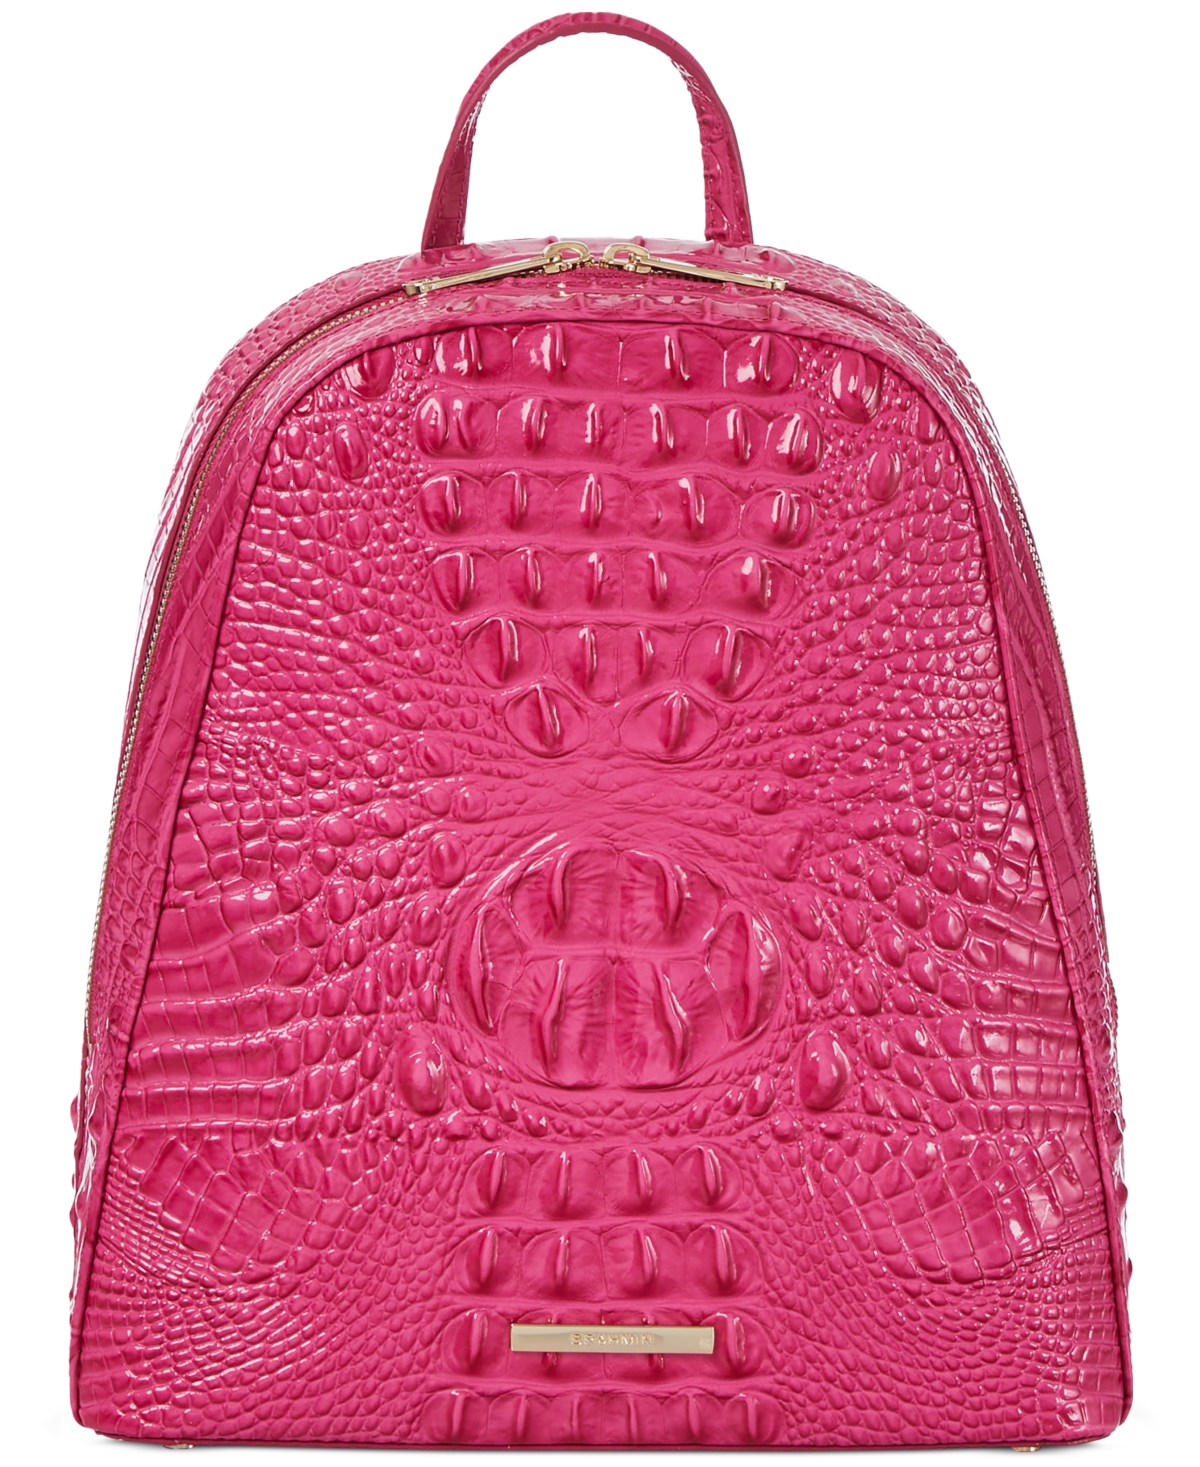 Brahmin Nola Leather Backpack In Paradise P